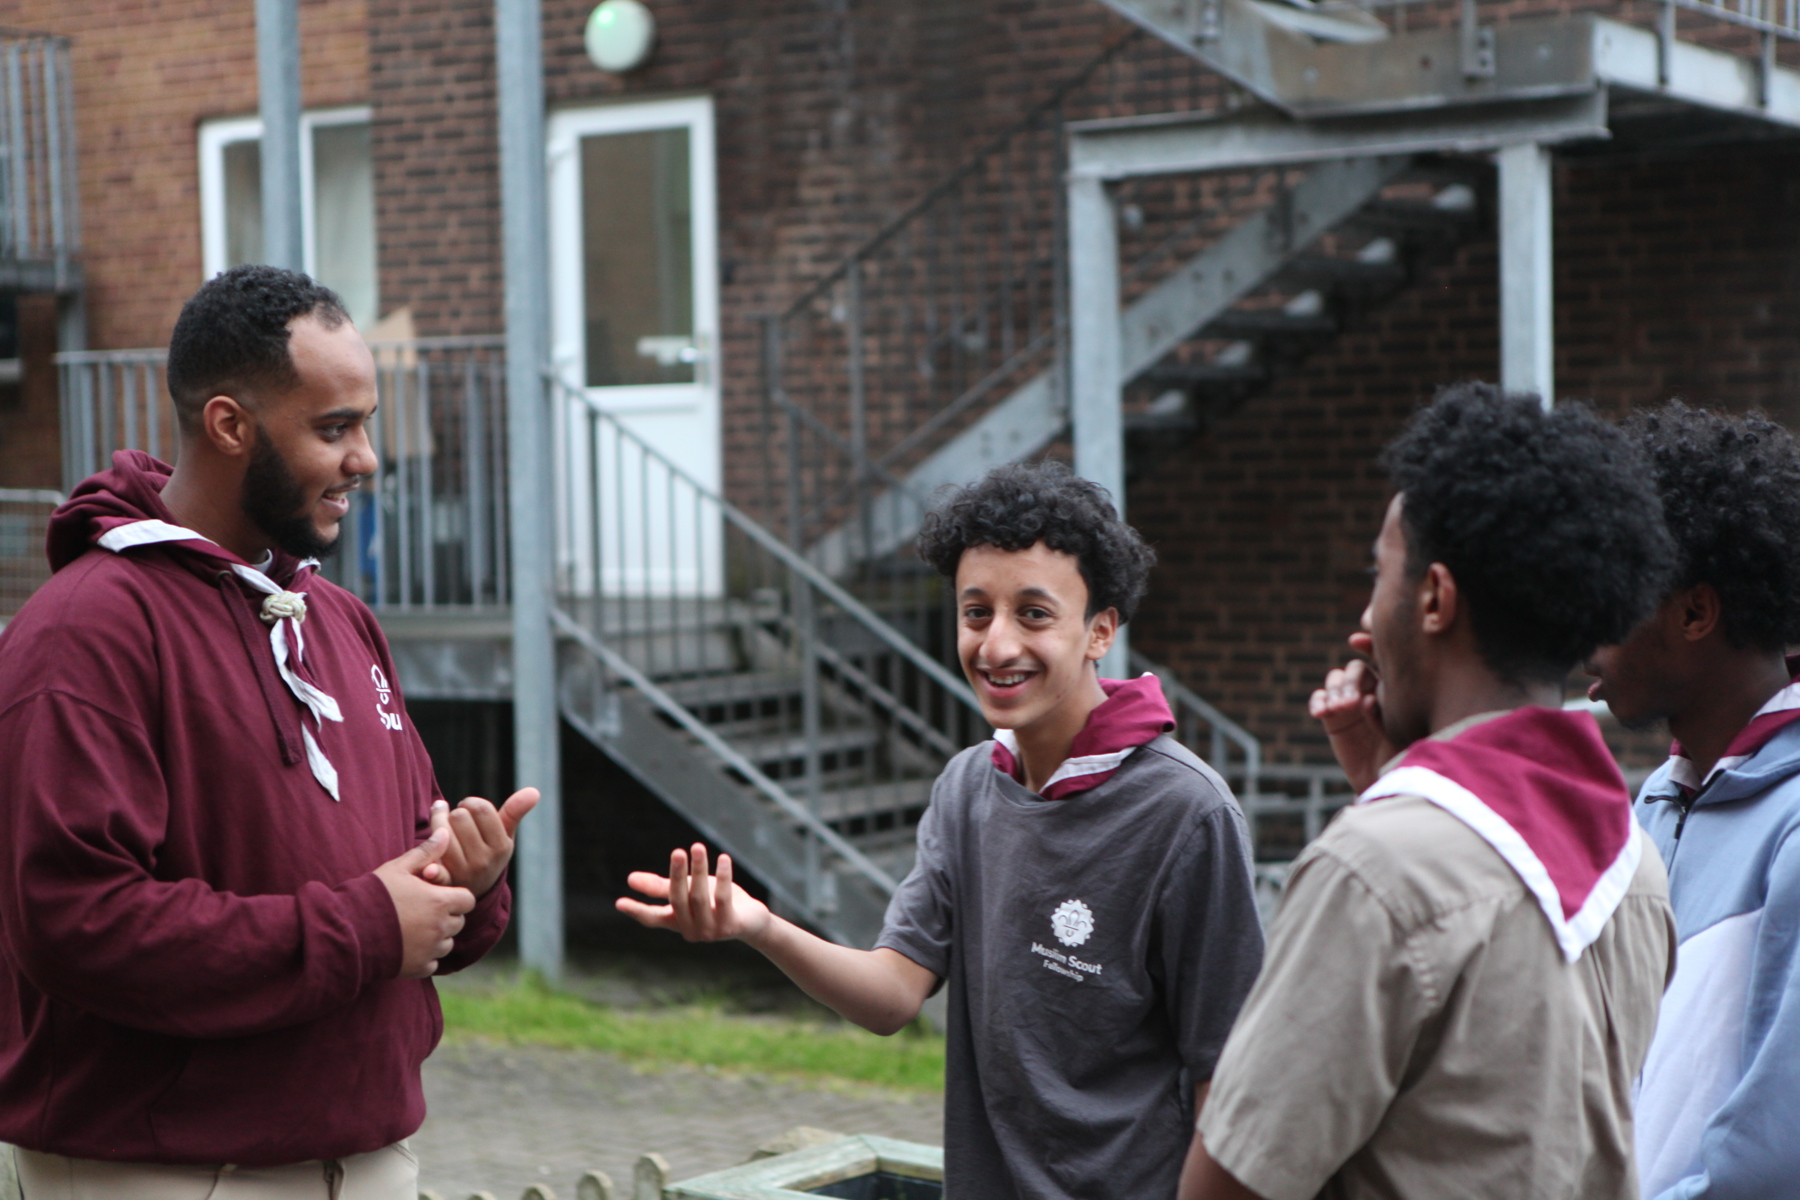 A Scout volunteer talking to three Scouts outside the building